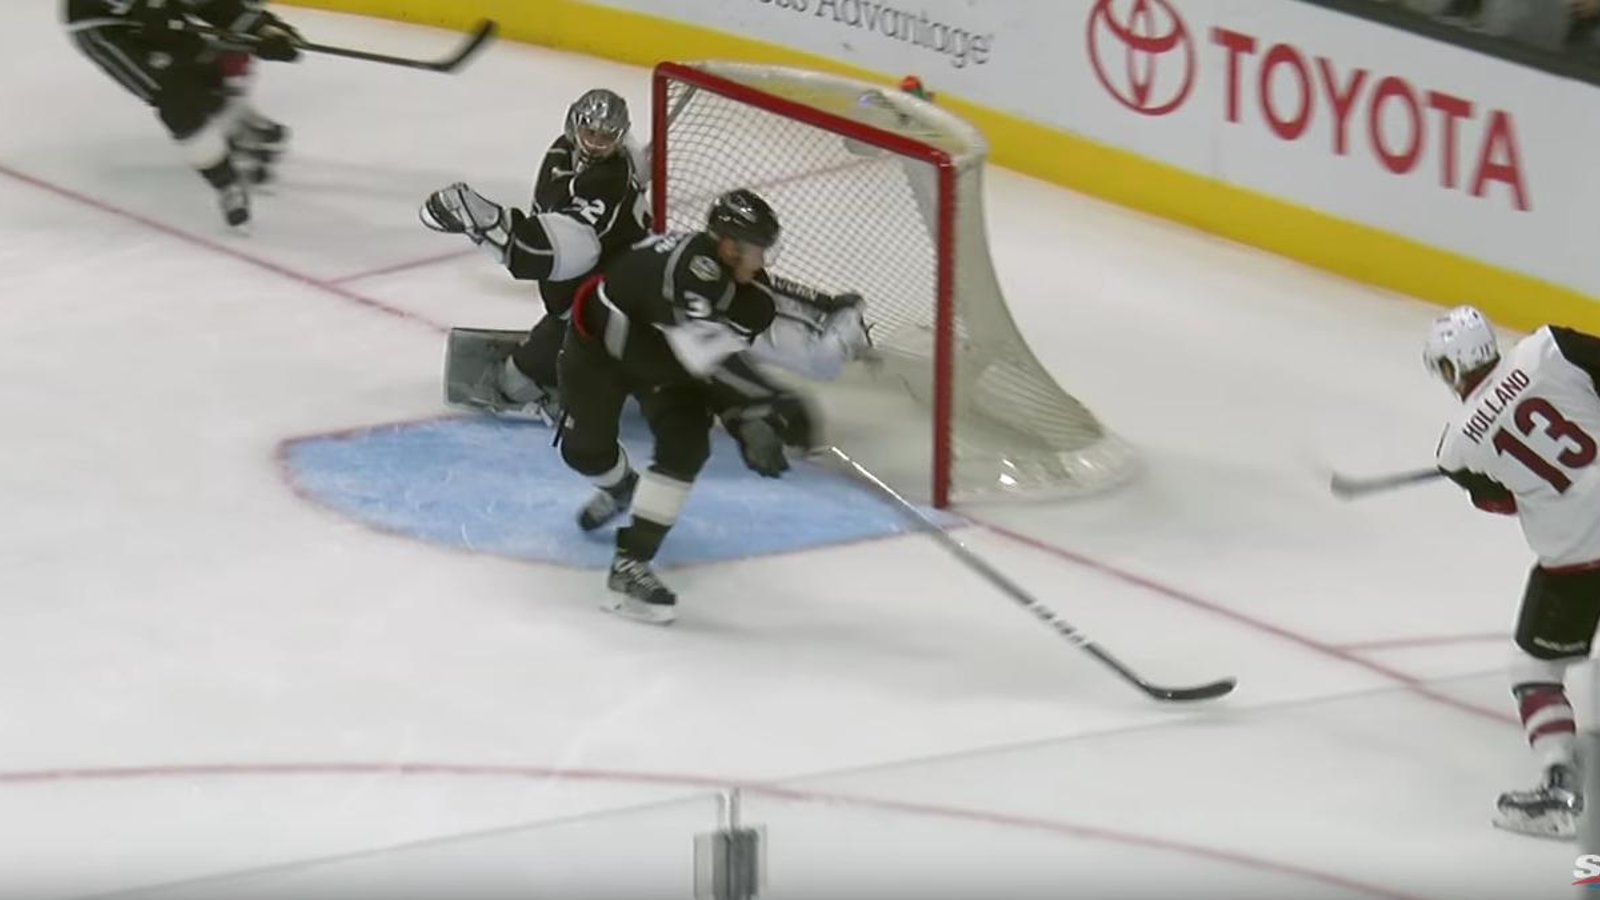 MUST SEE : Quick with the save of the year candidate! 